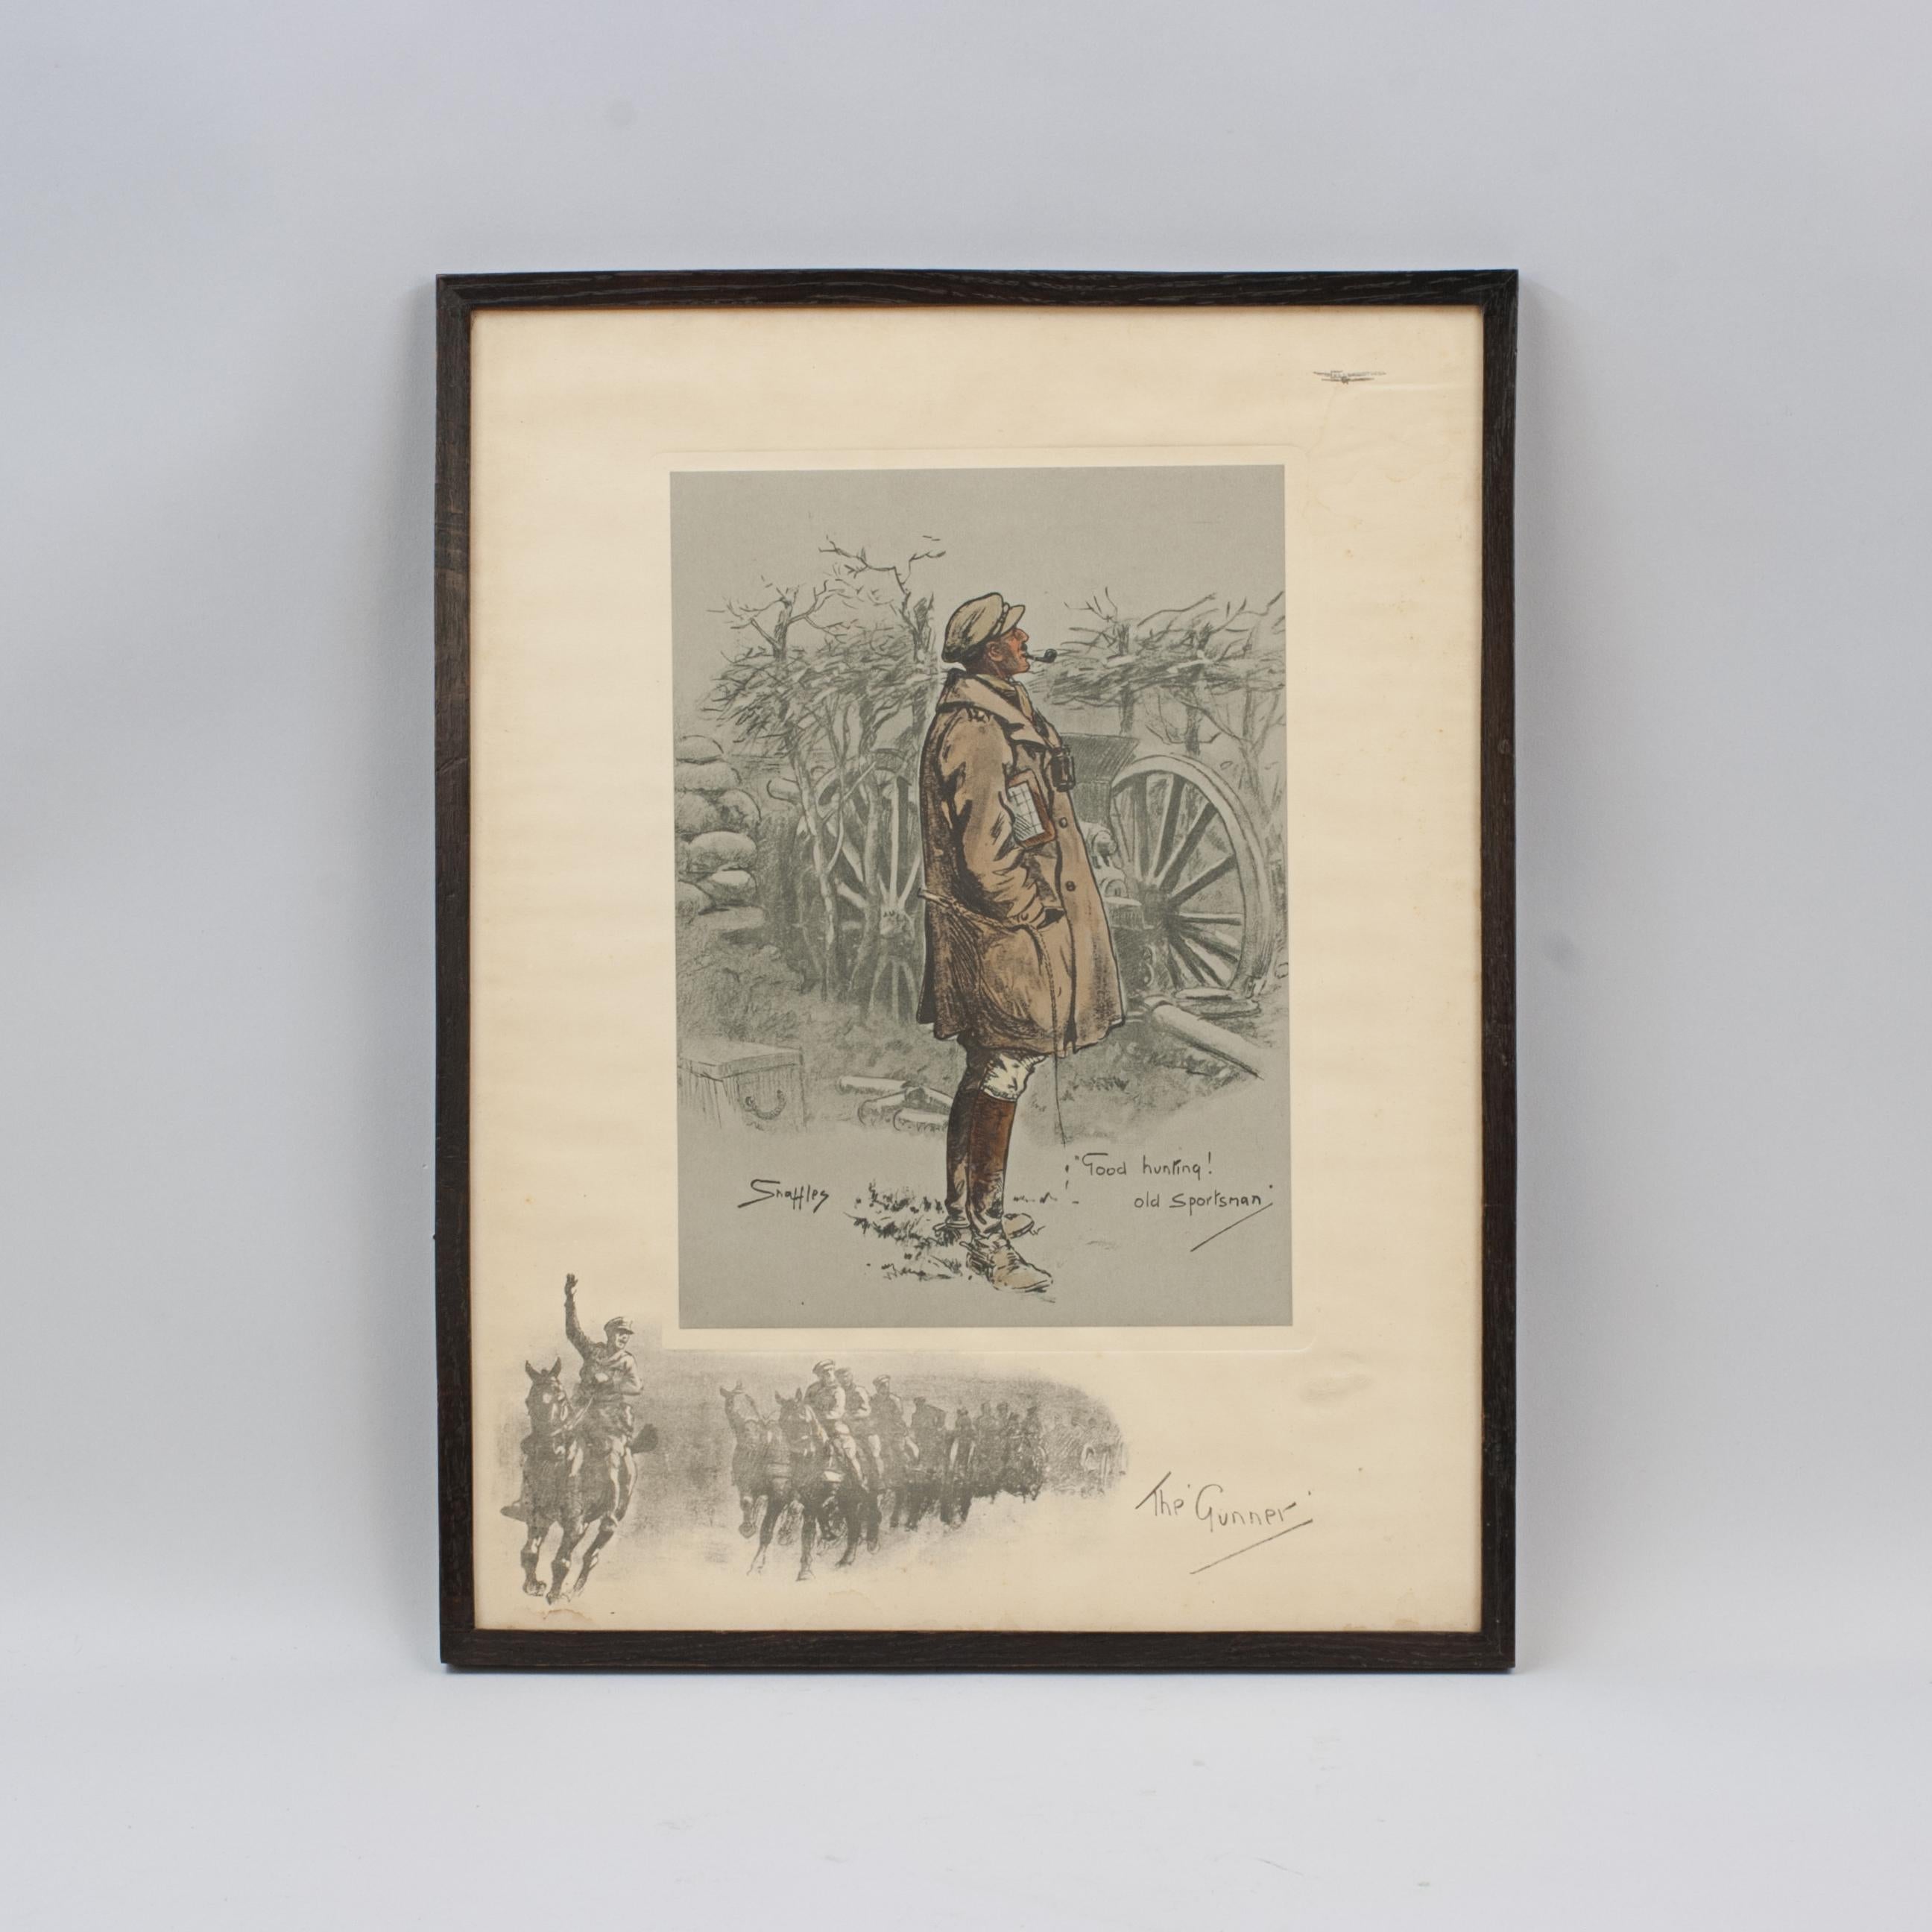 Snaffles WWI Military Print, The Gunner.
A good Snaffles WWI military print entitled 'The 'Gunner', it is a hand coloured lithograph and shows the Gunner looking up at a passing plane (it is a remaque in the top right corner) with the caption 'Good